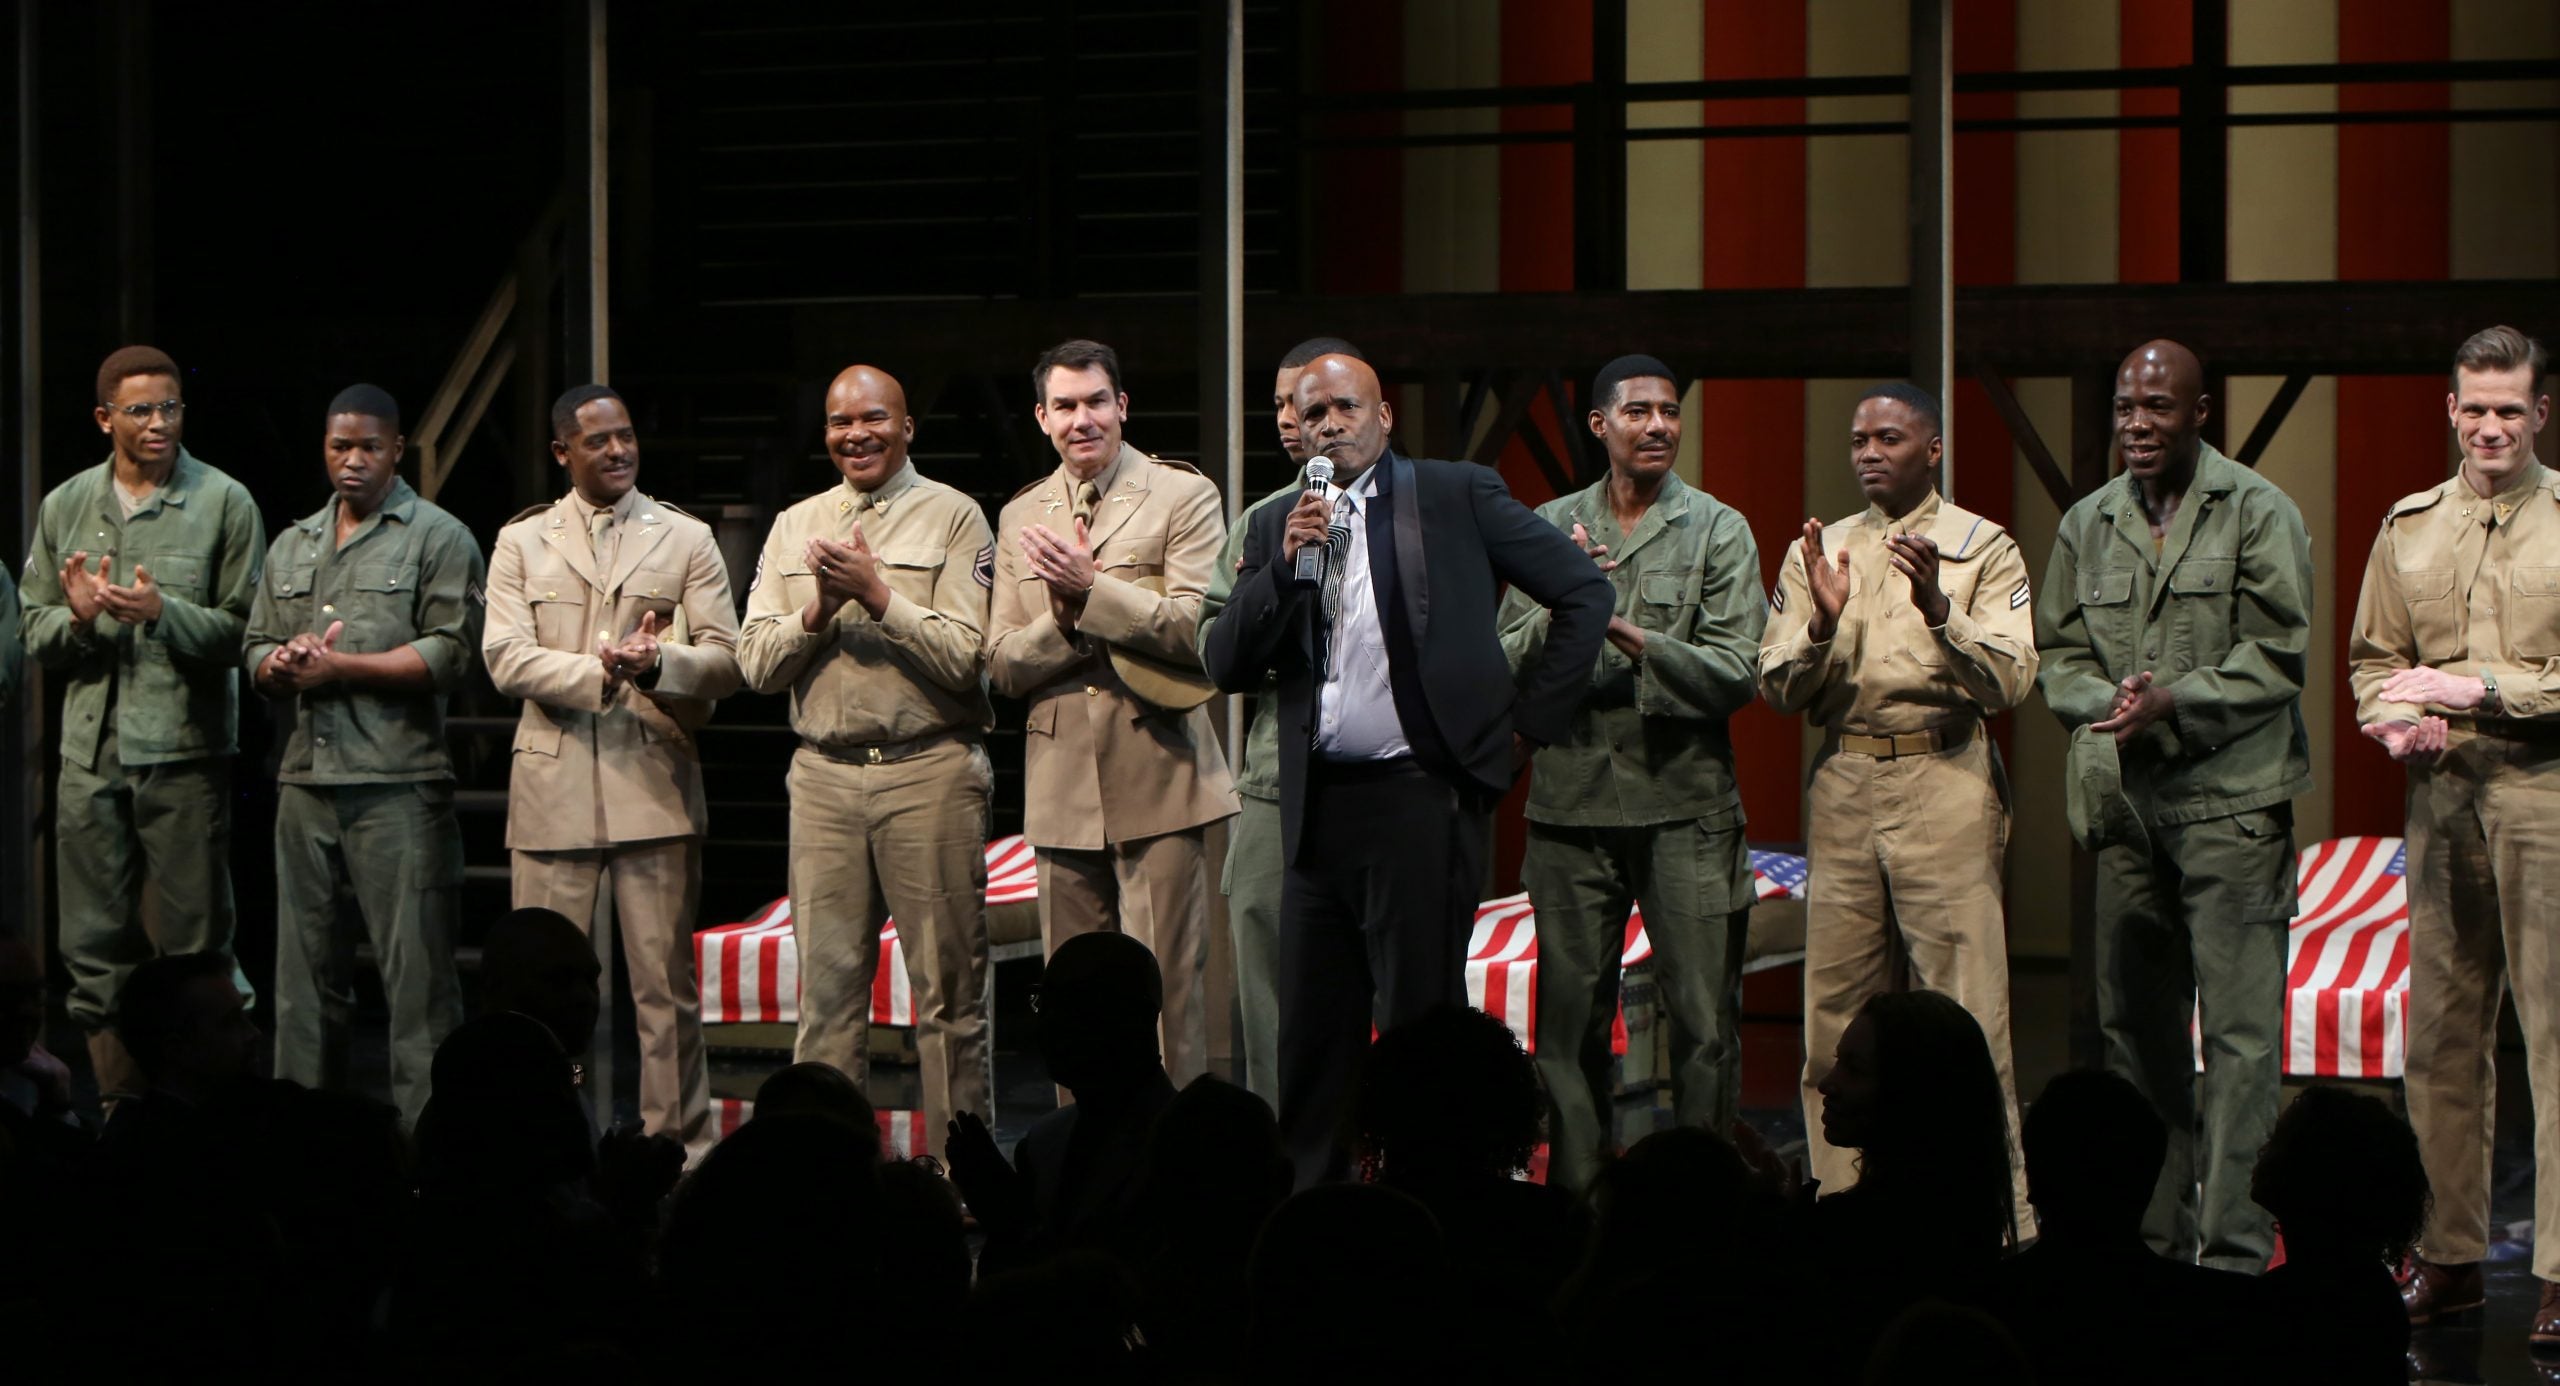 Brothers In Arms: ‘A Soldier’s Play’ Return To Broadway Is As Timely As Ever